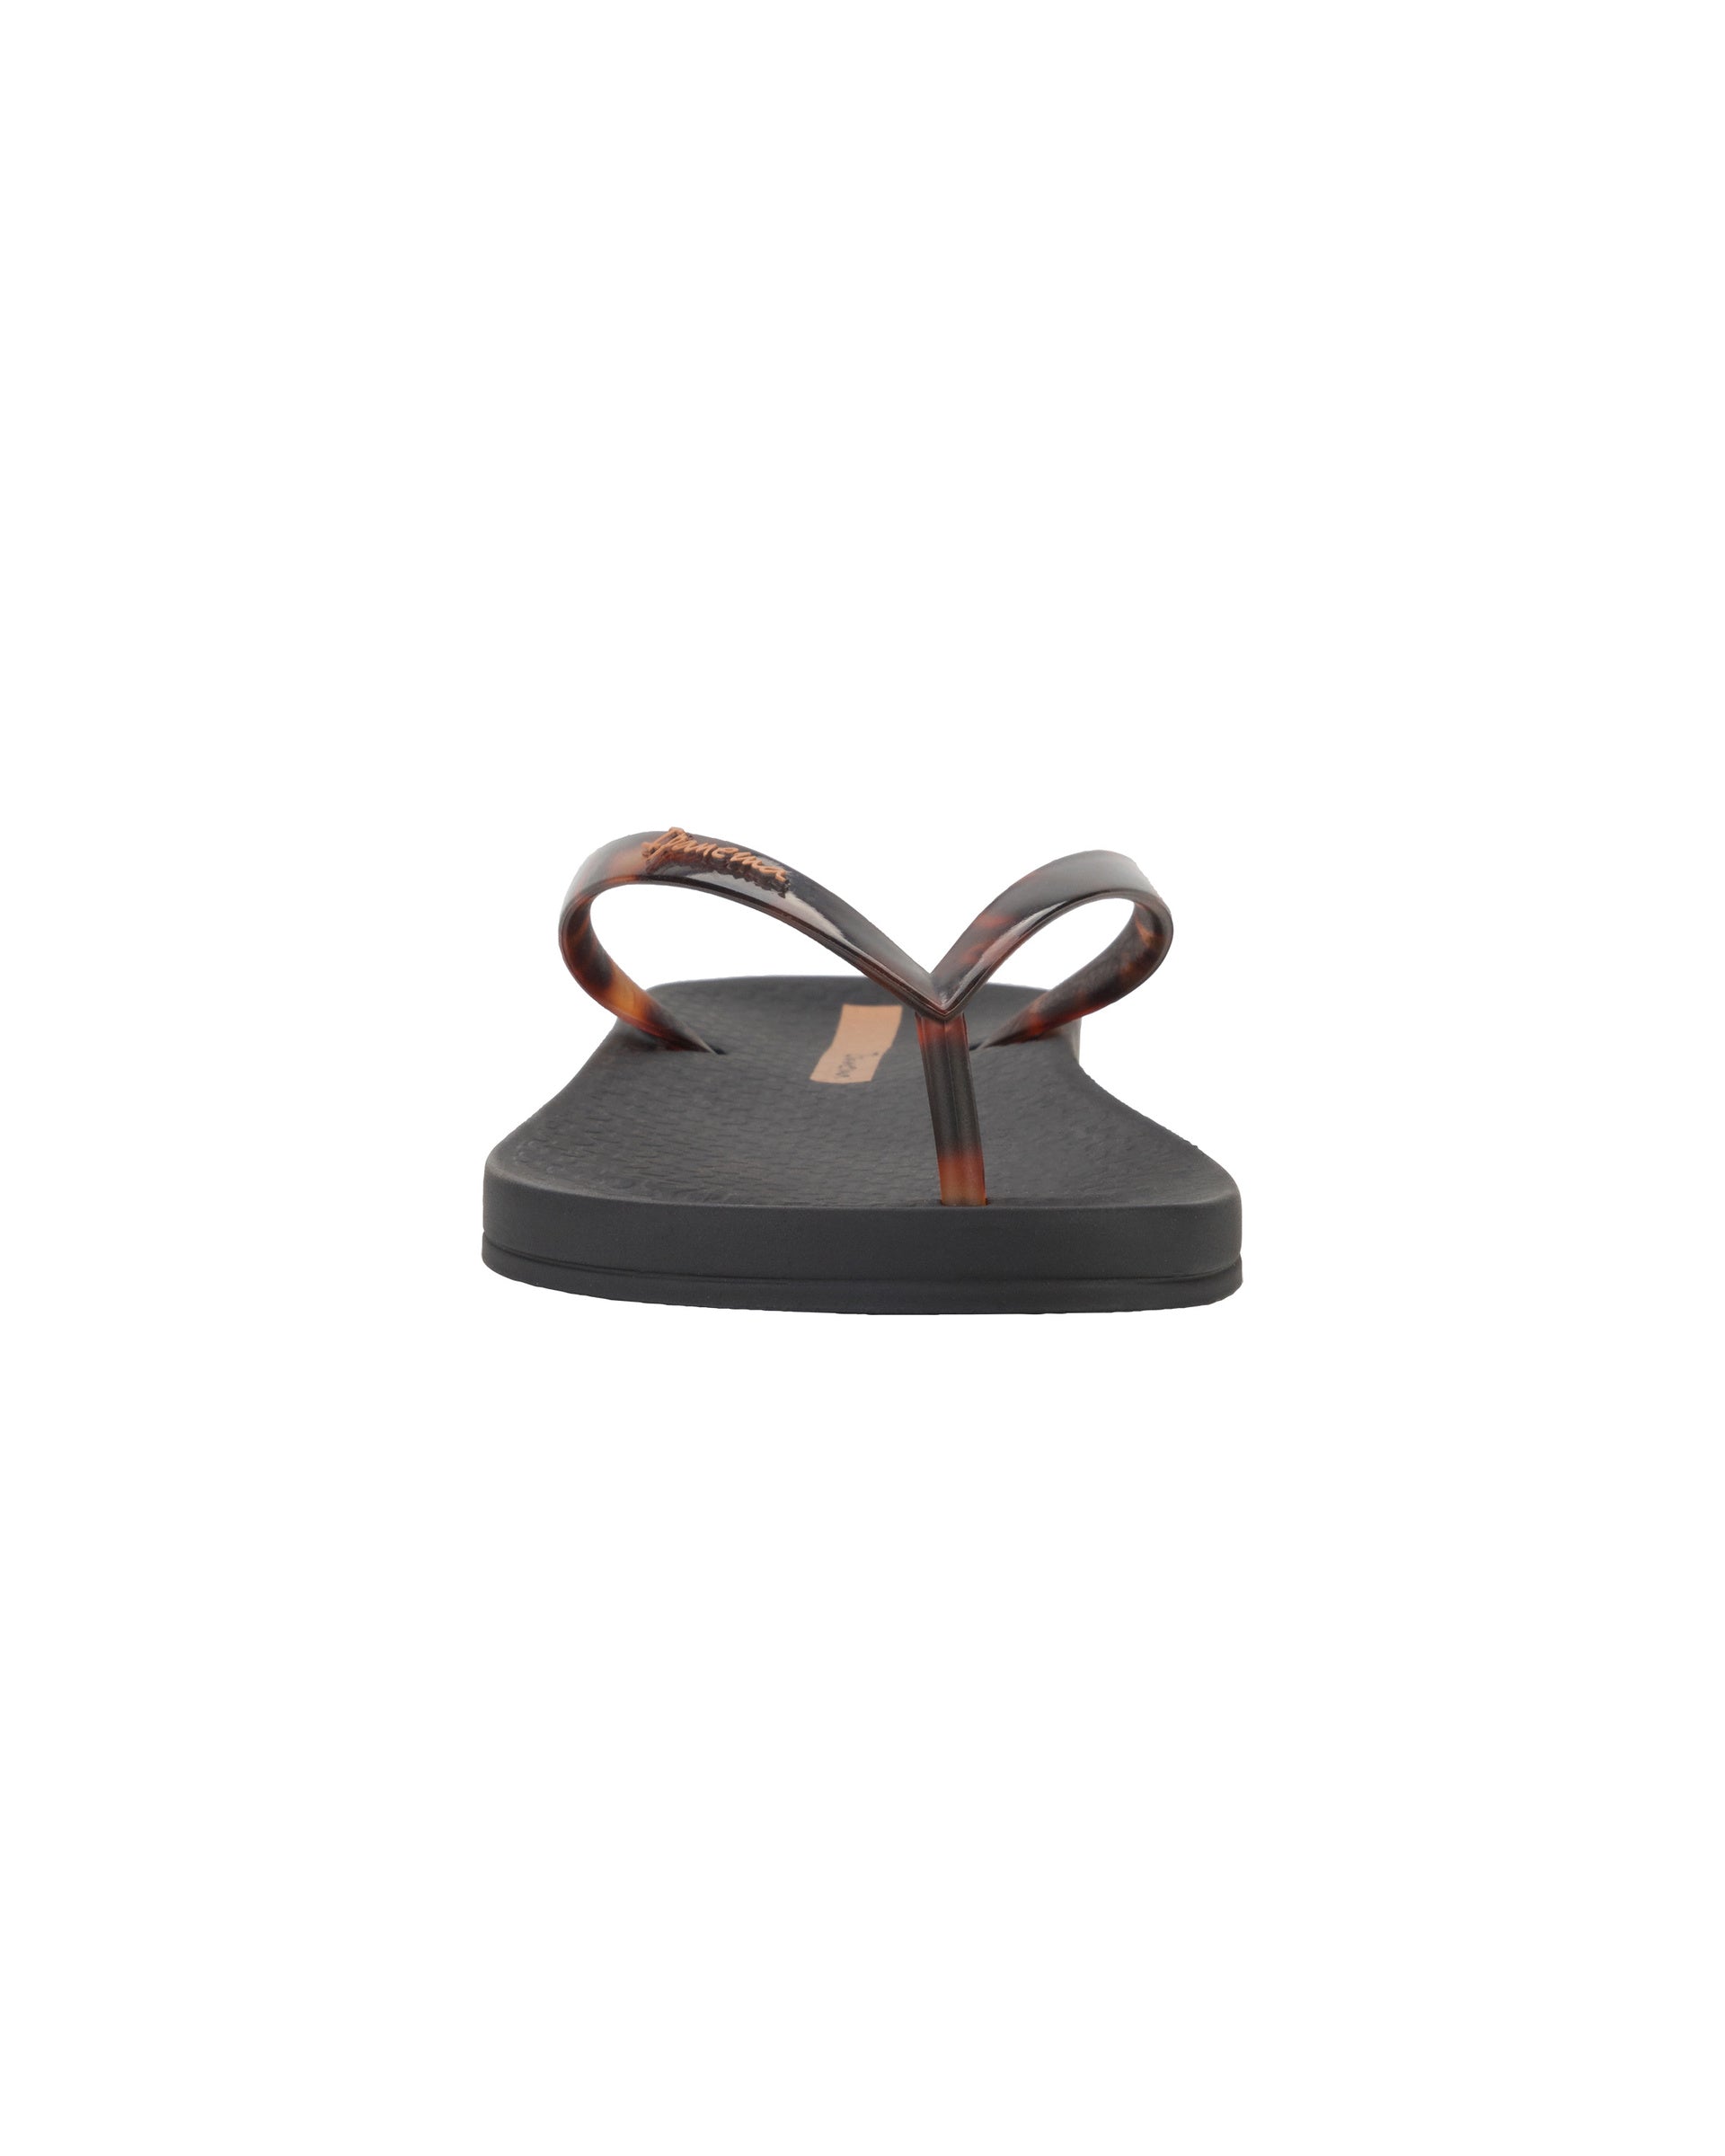 Front view of a black Ipanema Ana Connect women's flip flop with brown tortoiseshell  color strap.